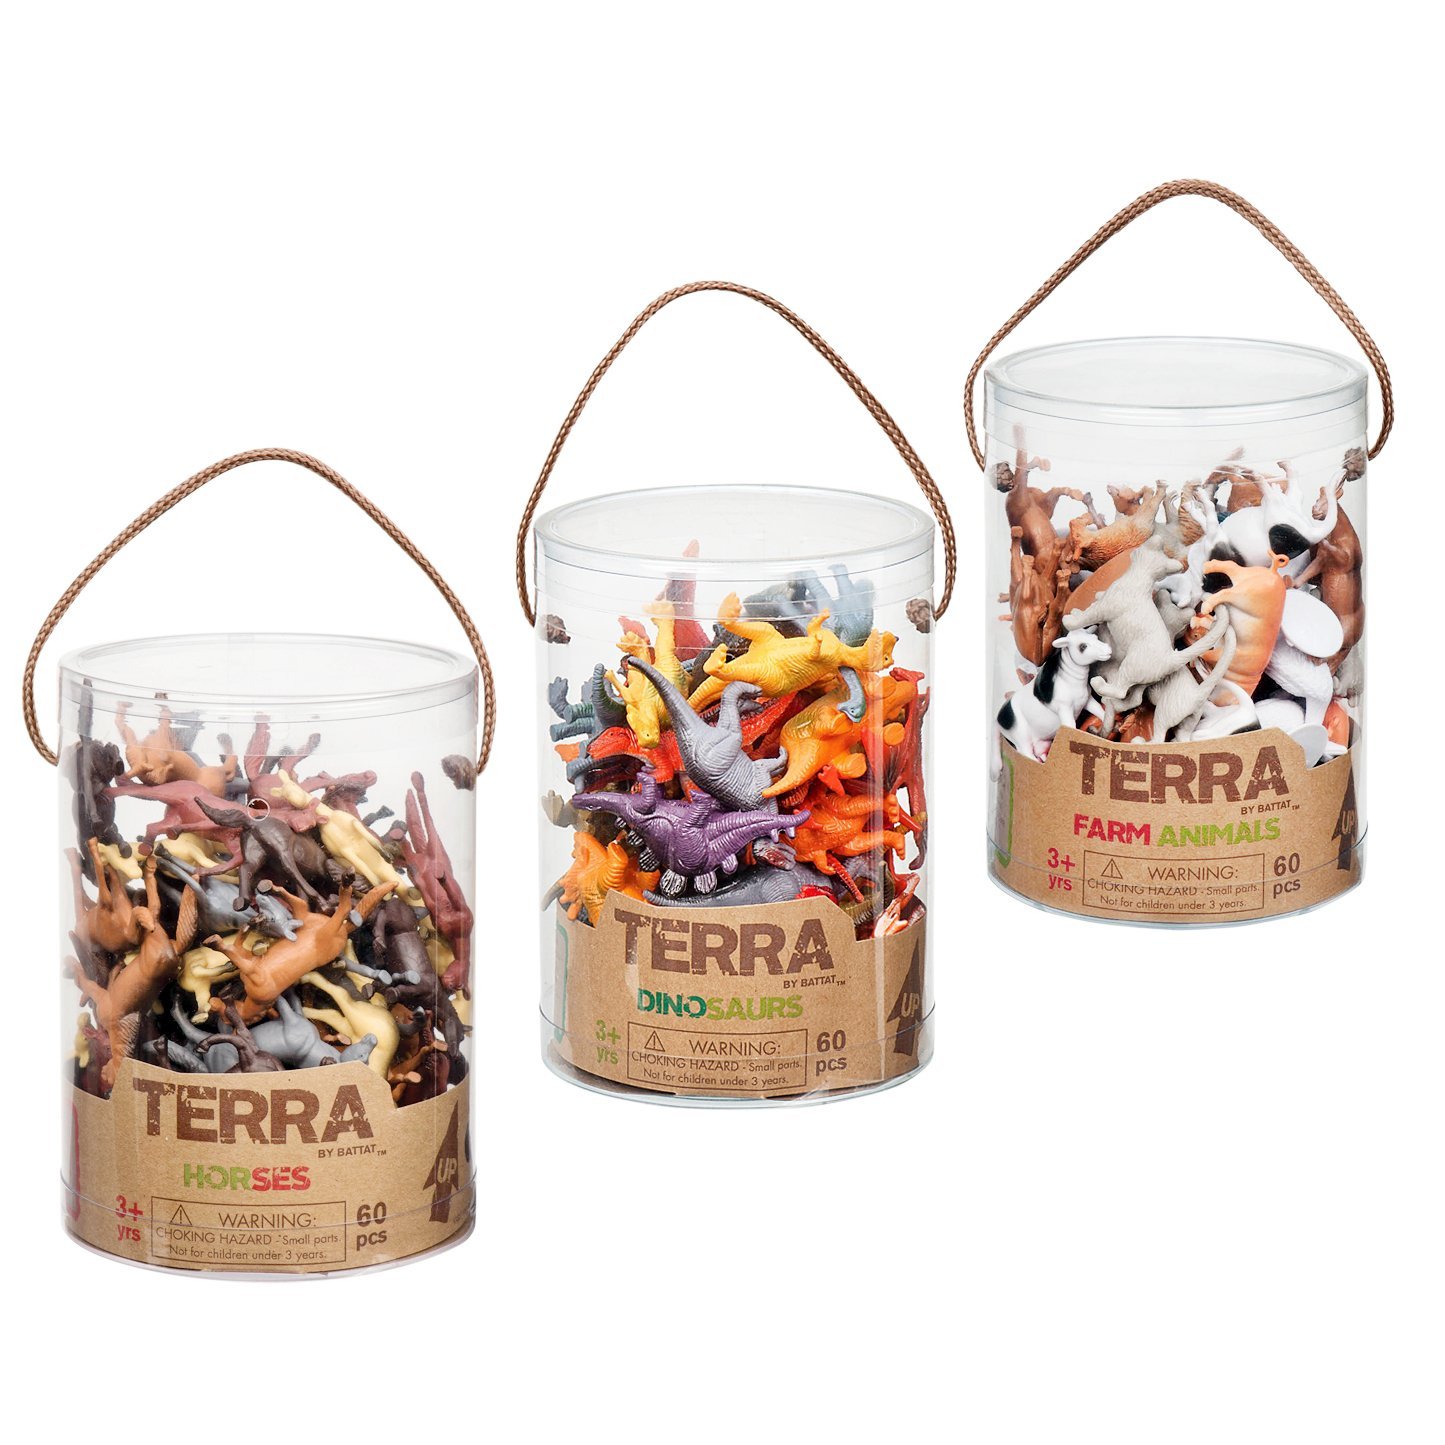 Shop Terra, animals in a can online at Modulor